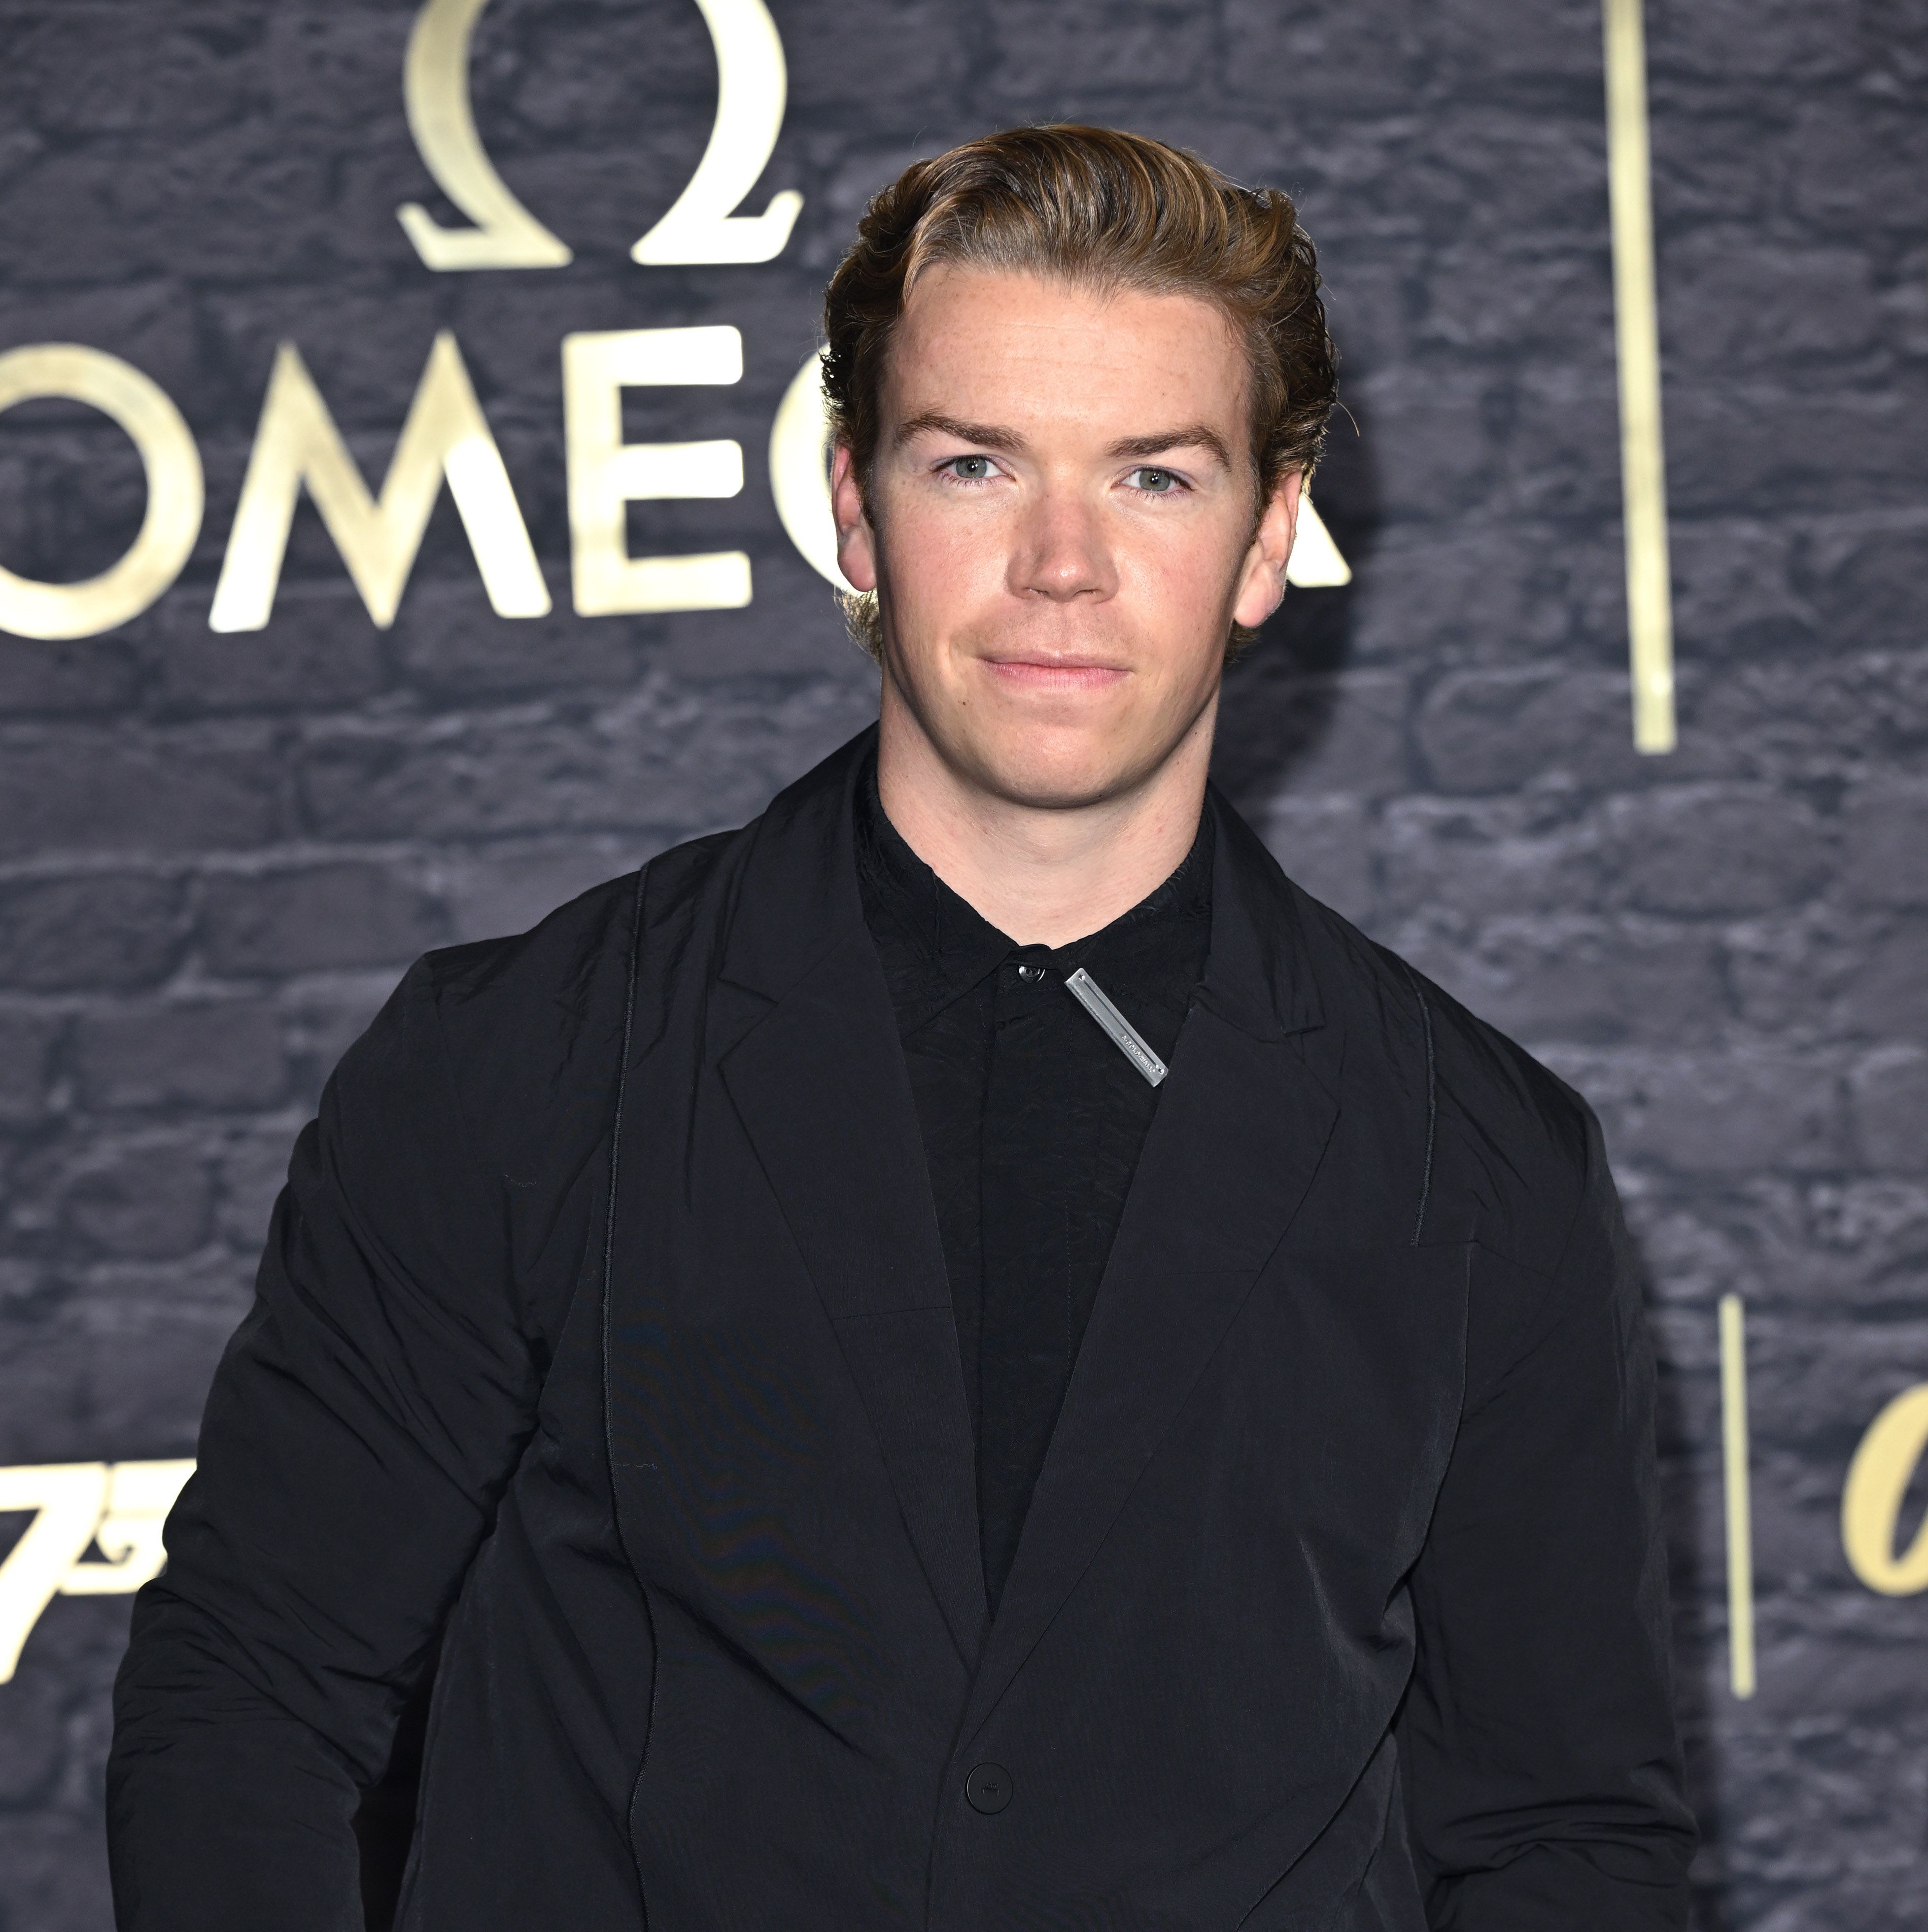 We Just Got Our First Look at Will Poulter's MCU Transformation Into Adam Warlock